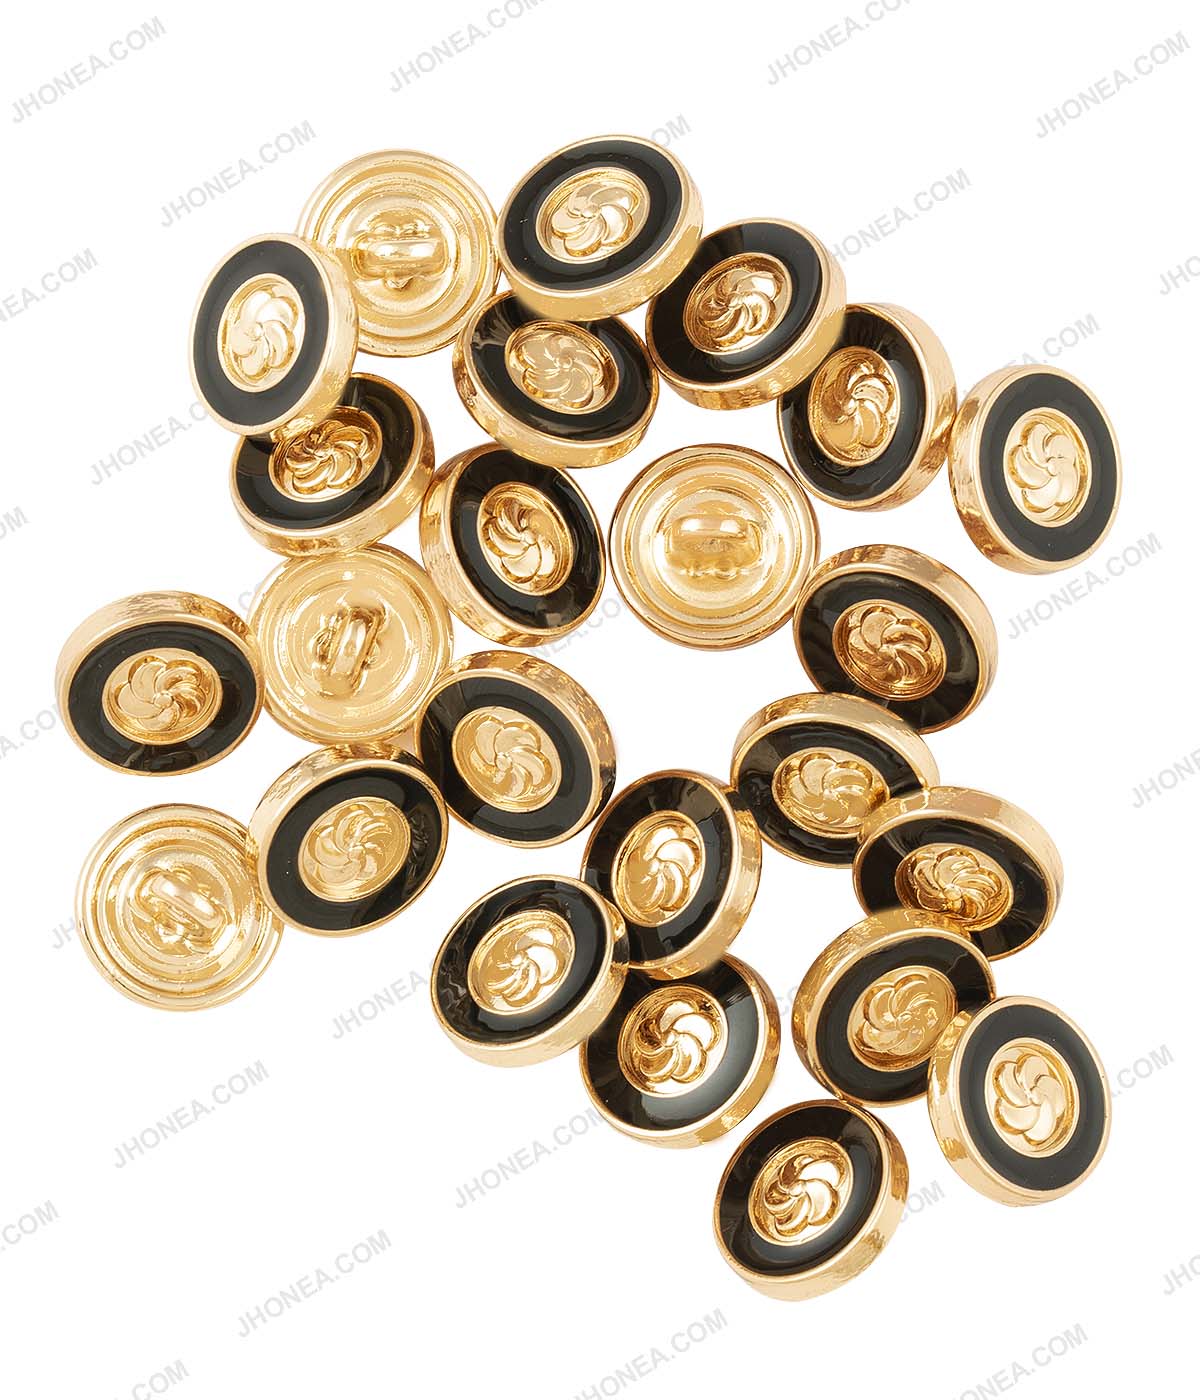 Shiny Embossed Flower Enamel Rim Border 10mm Shiny Gold with Black Color Shirt Buttons